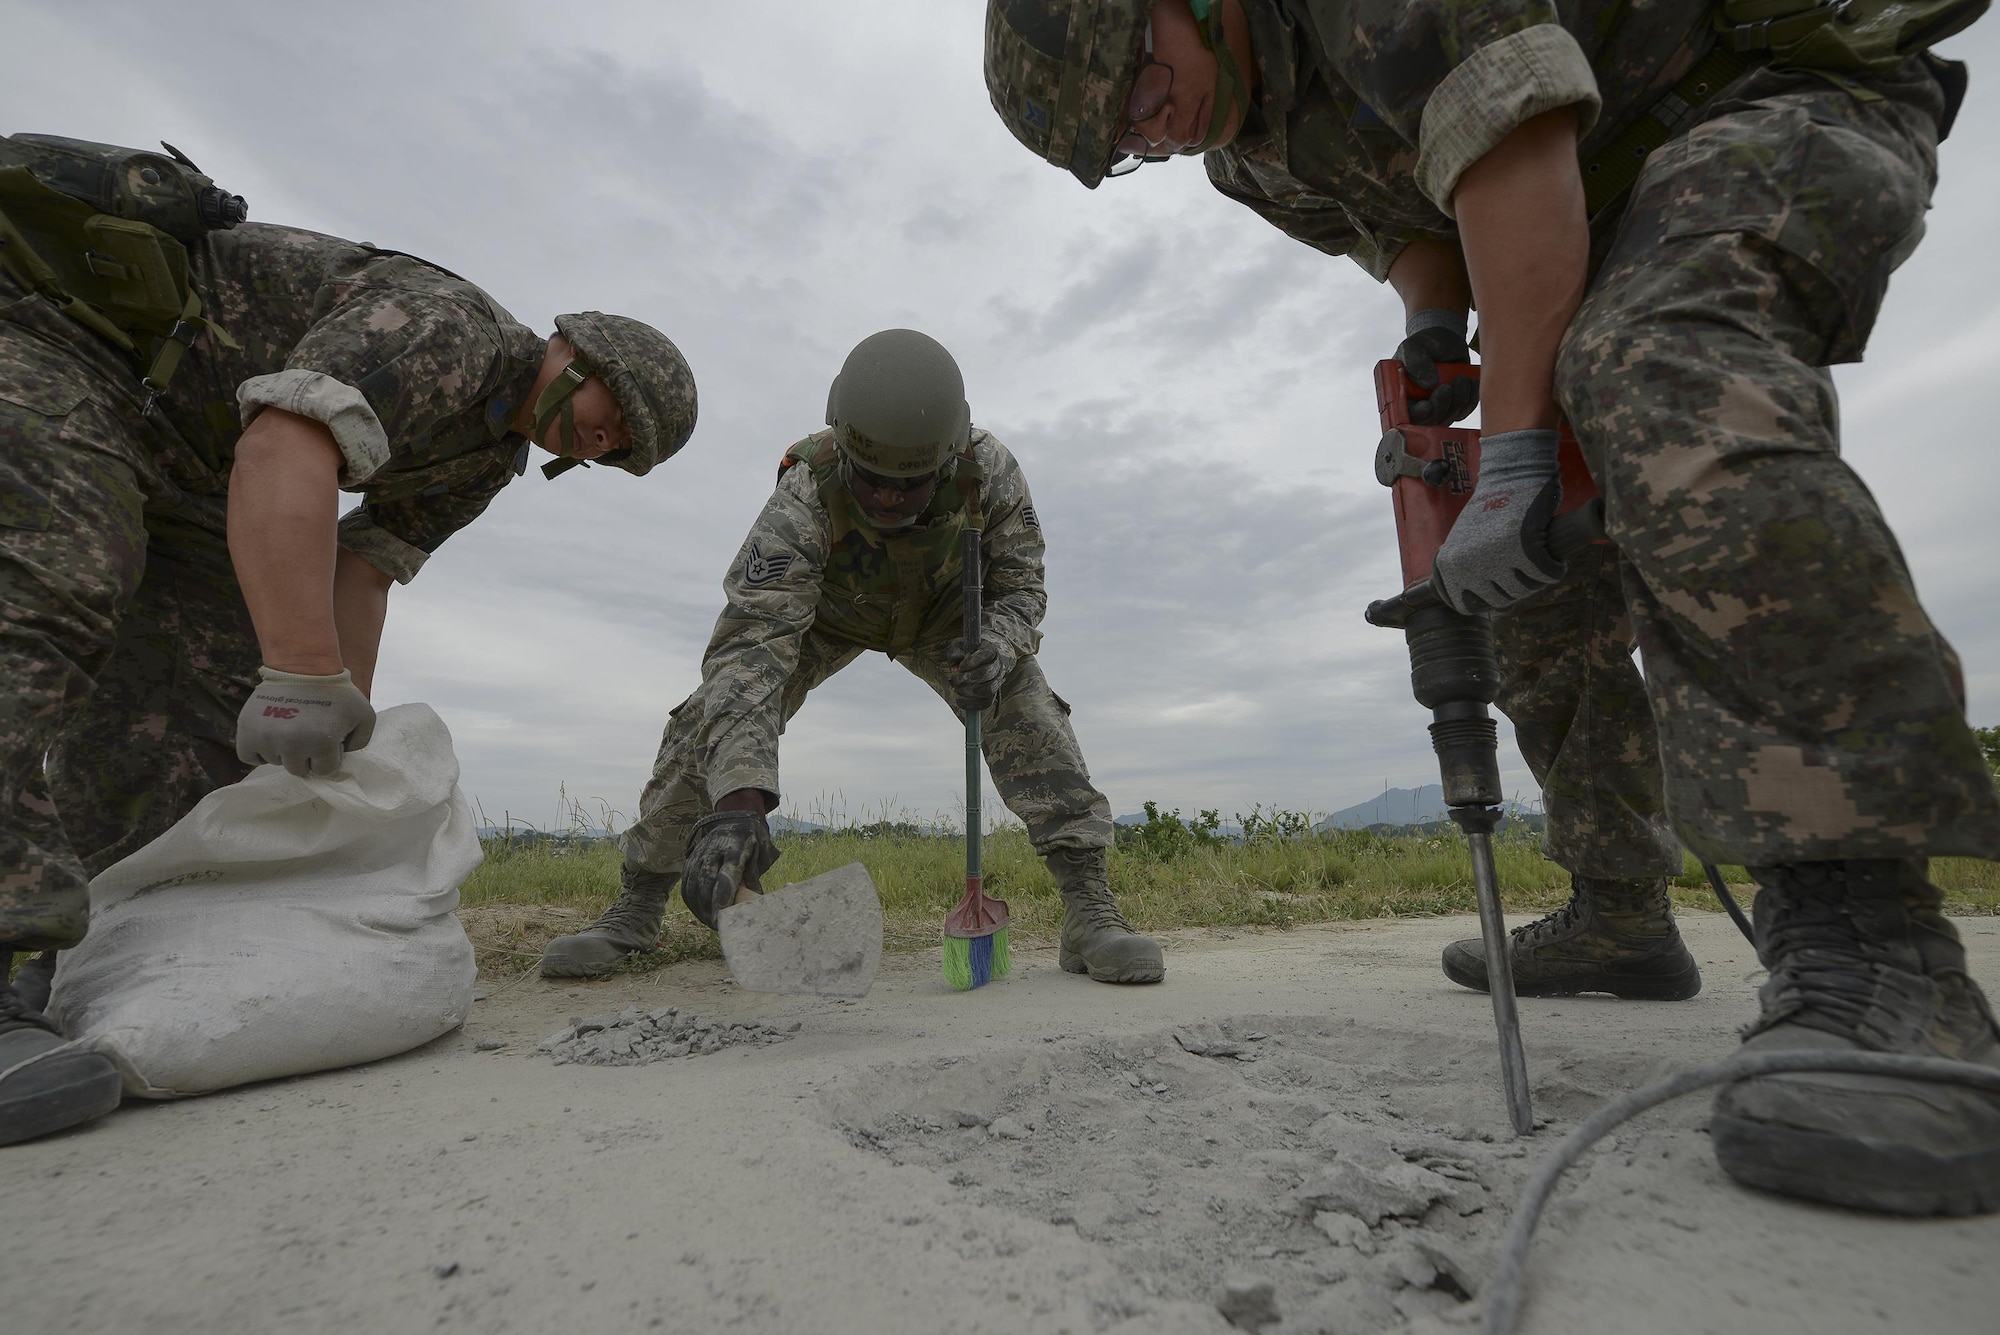 Airmen from the U.S. and South Korea work together to repair a damaged runway during exercise Pacific Unity, June 11, 2015, at Jungwon Air Base, South Korea. The exercise was designed to give U.S. and South Korean airmen the chance to further develop their international relationship by networking and exchanging information, while working together in a simulated contingency. (U.S. Air Force photo/Staff Sgt. Jake Barreiro)